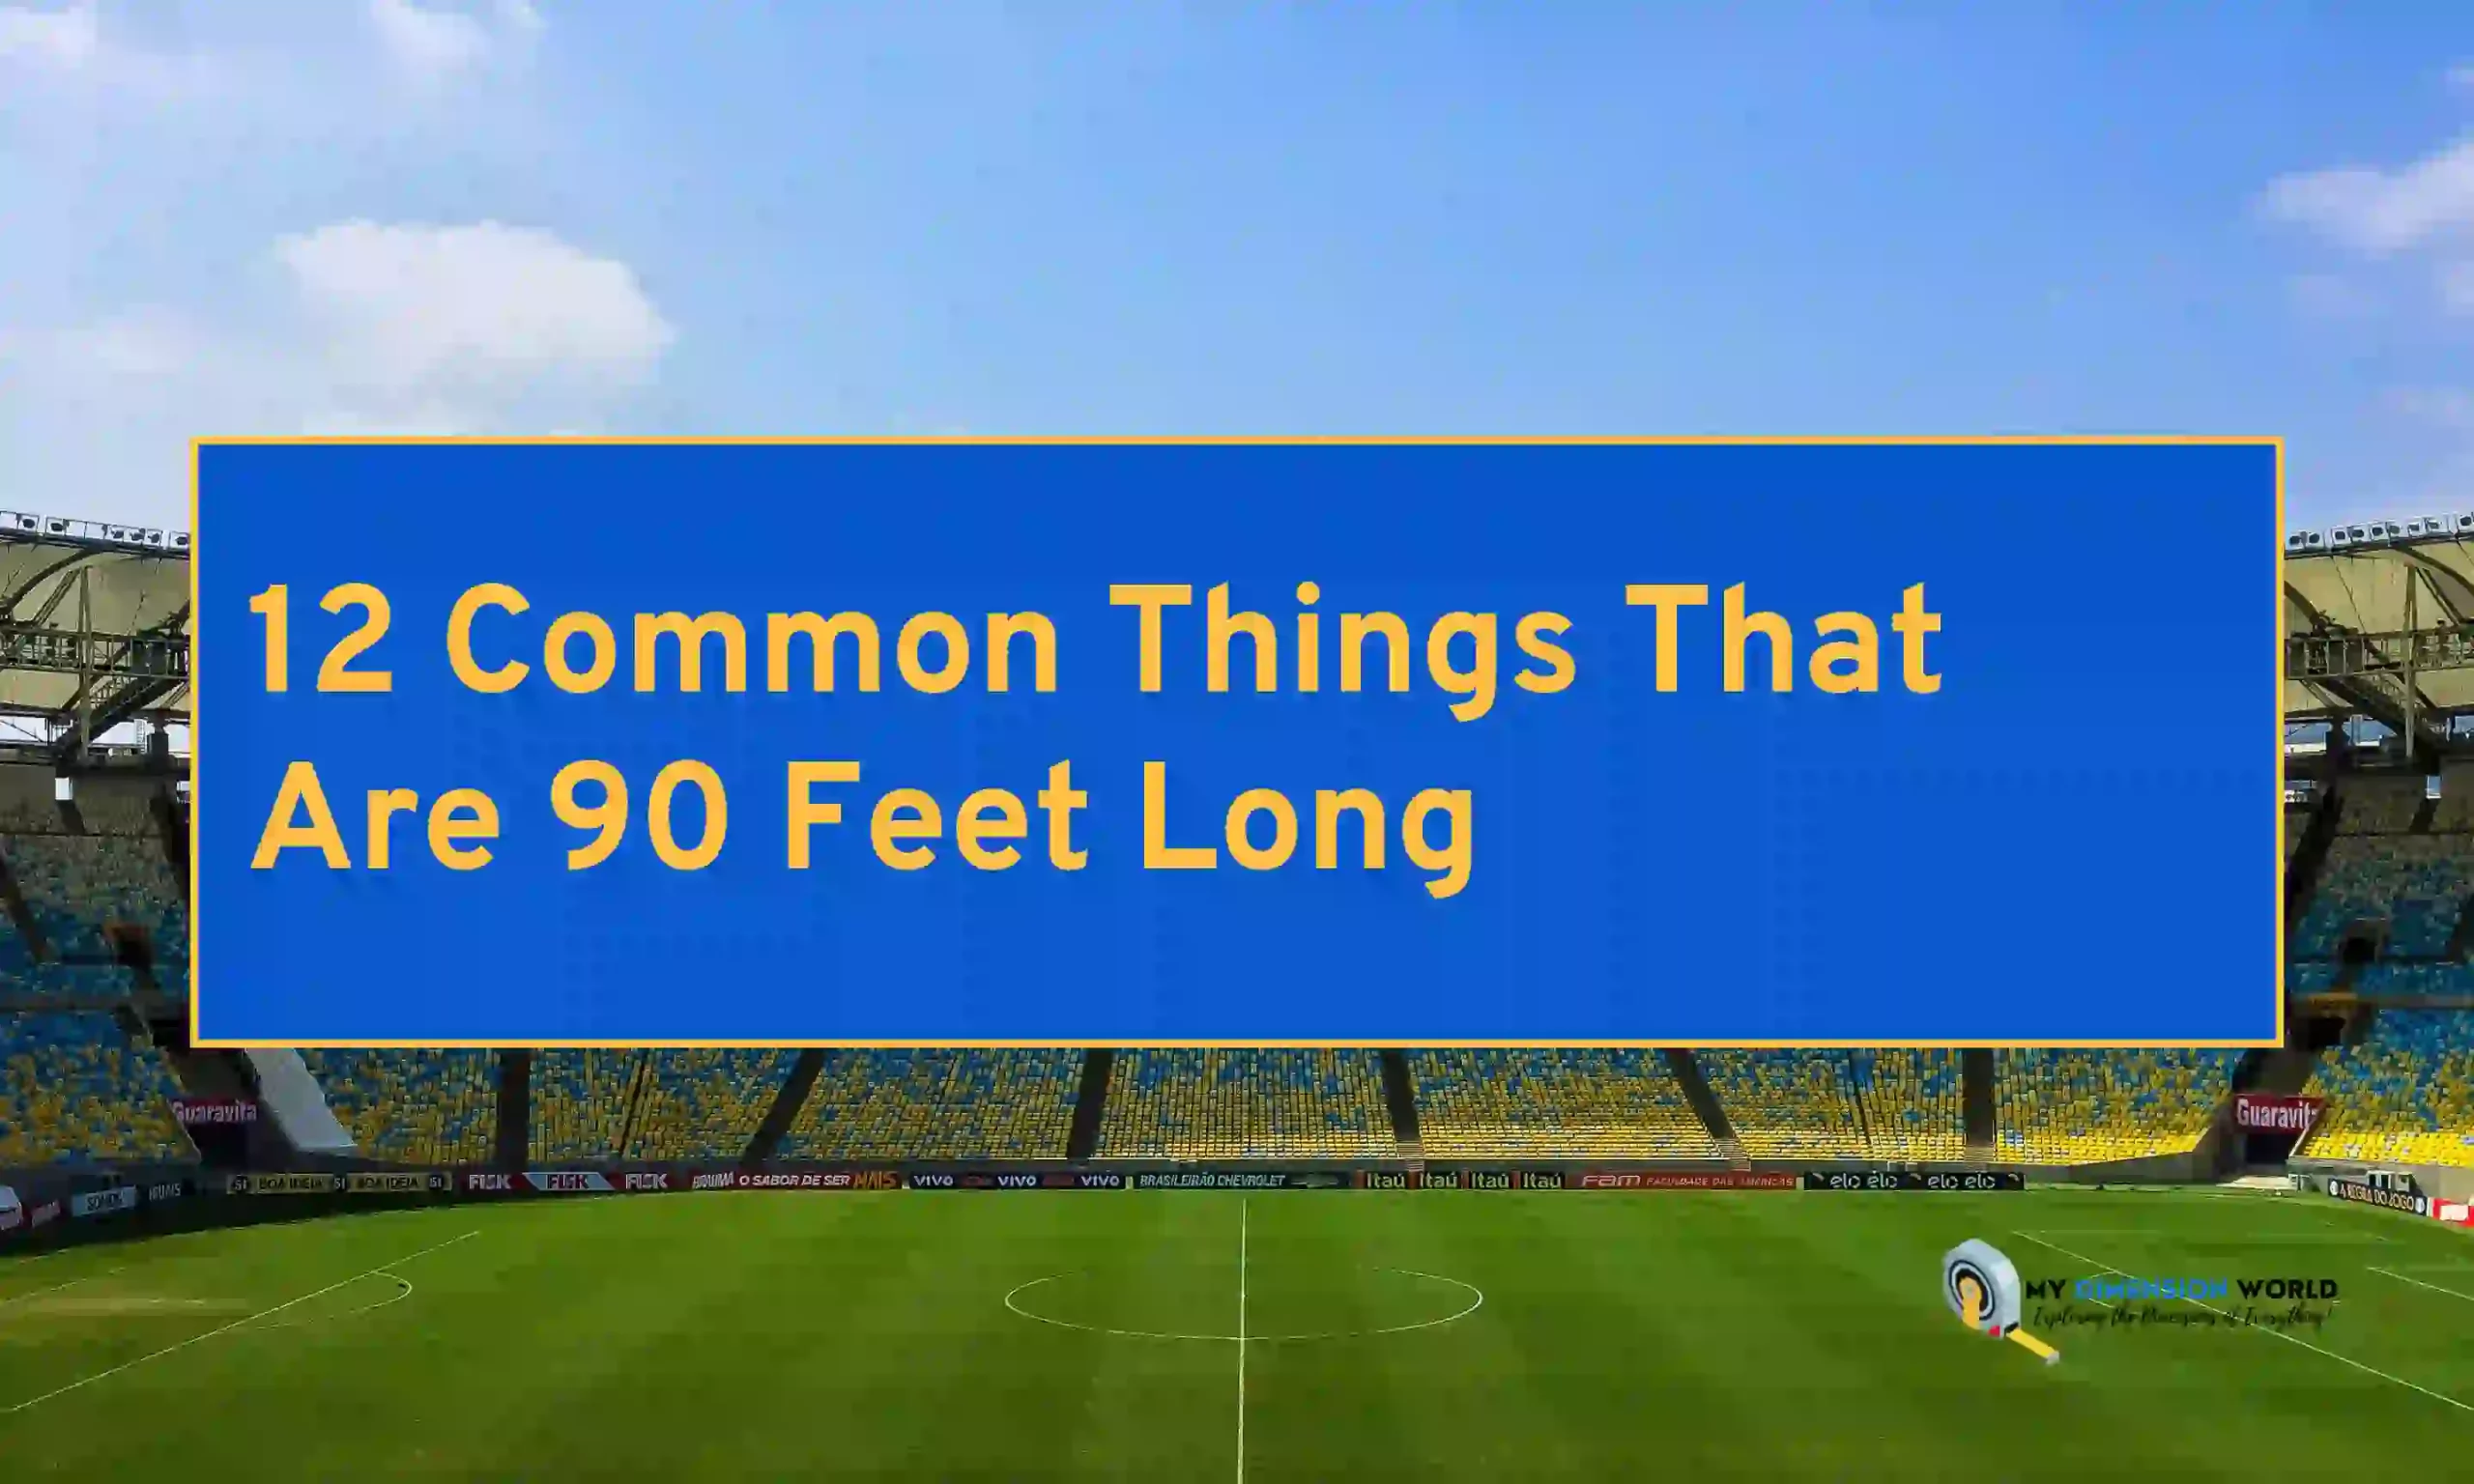 12 Common Things That Are 90 Feet Long